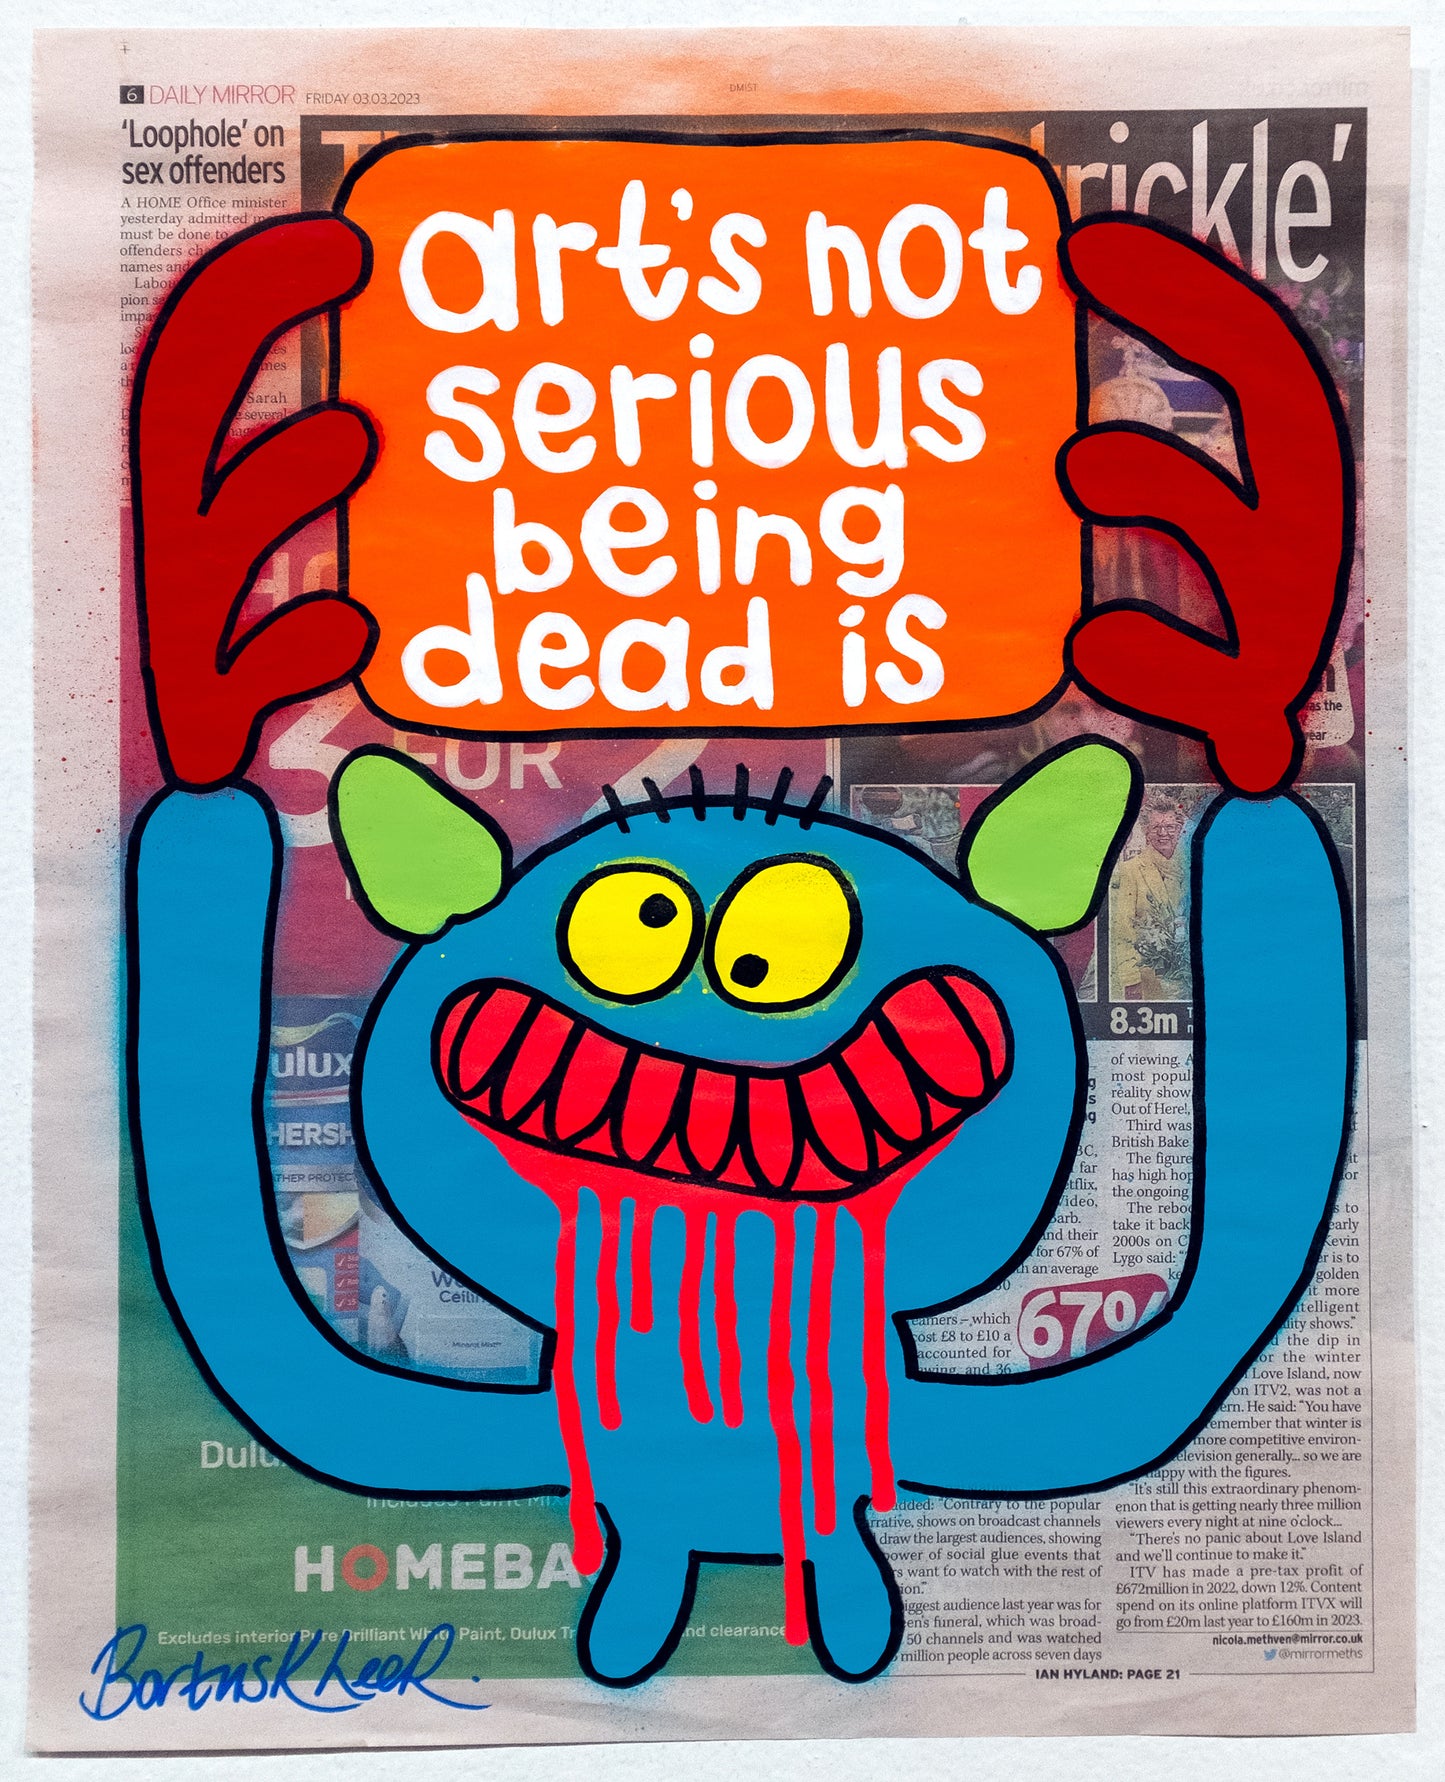 art's not serious being dead is by Bortusk Leer